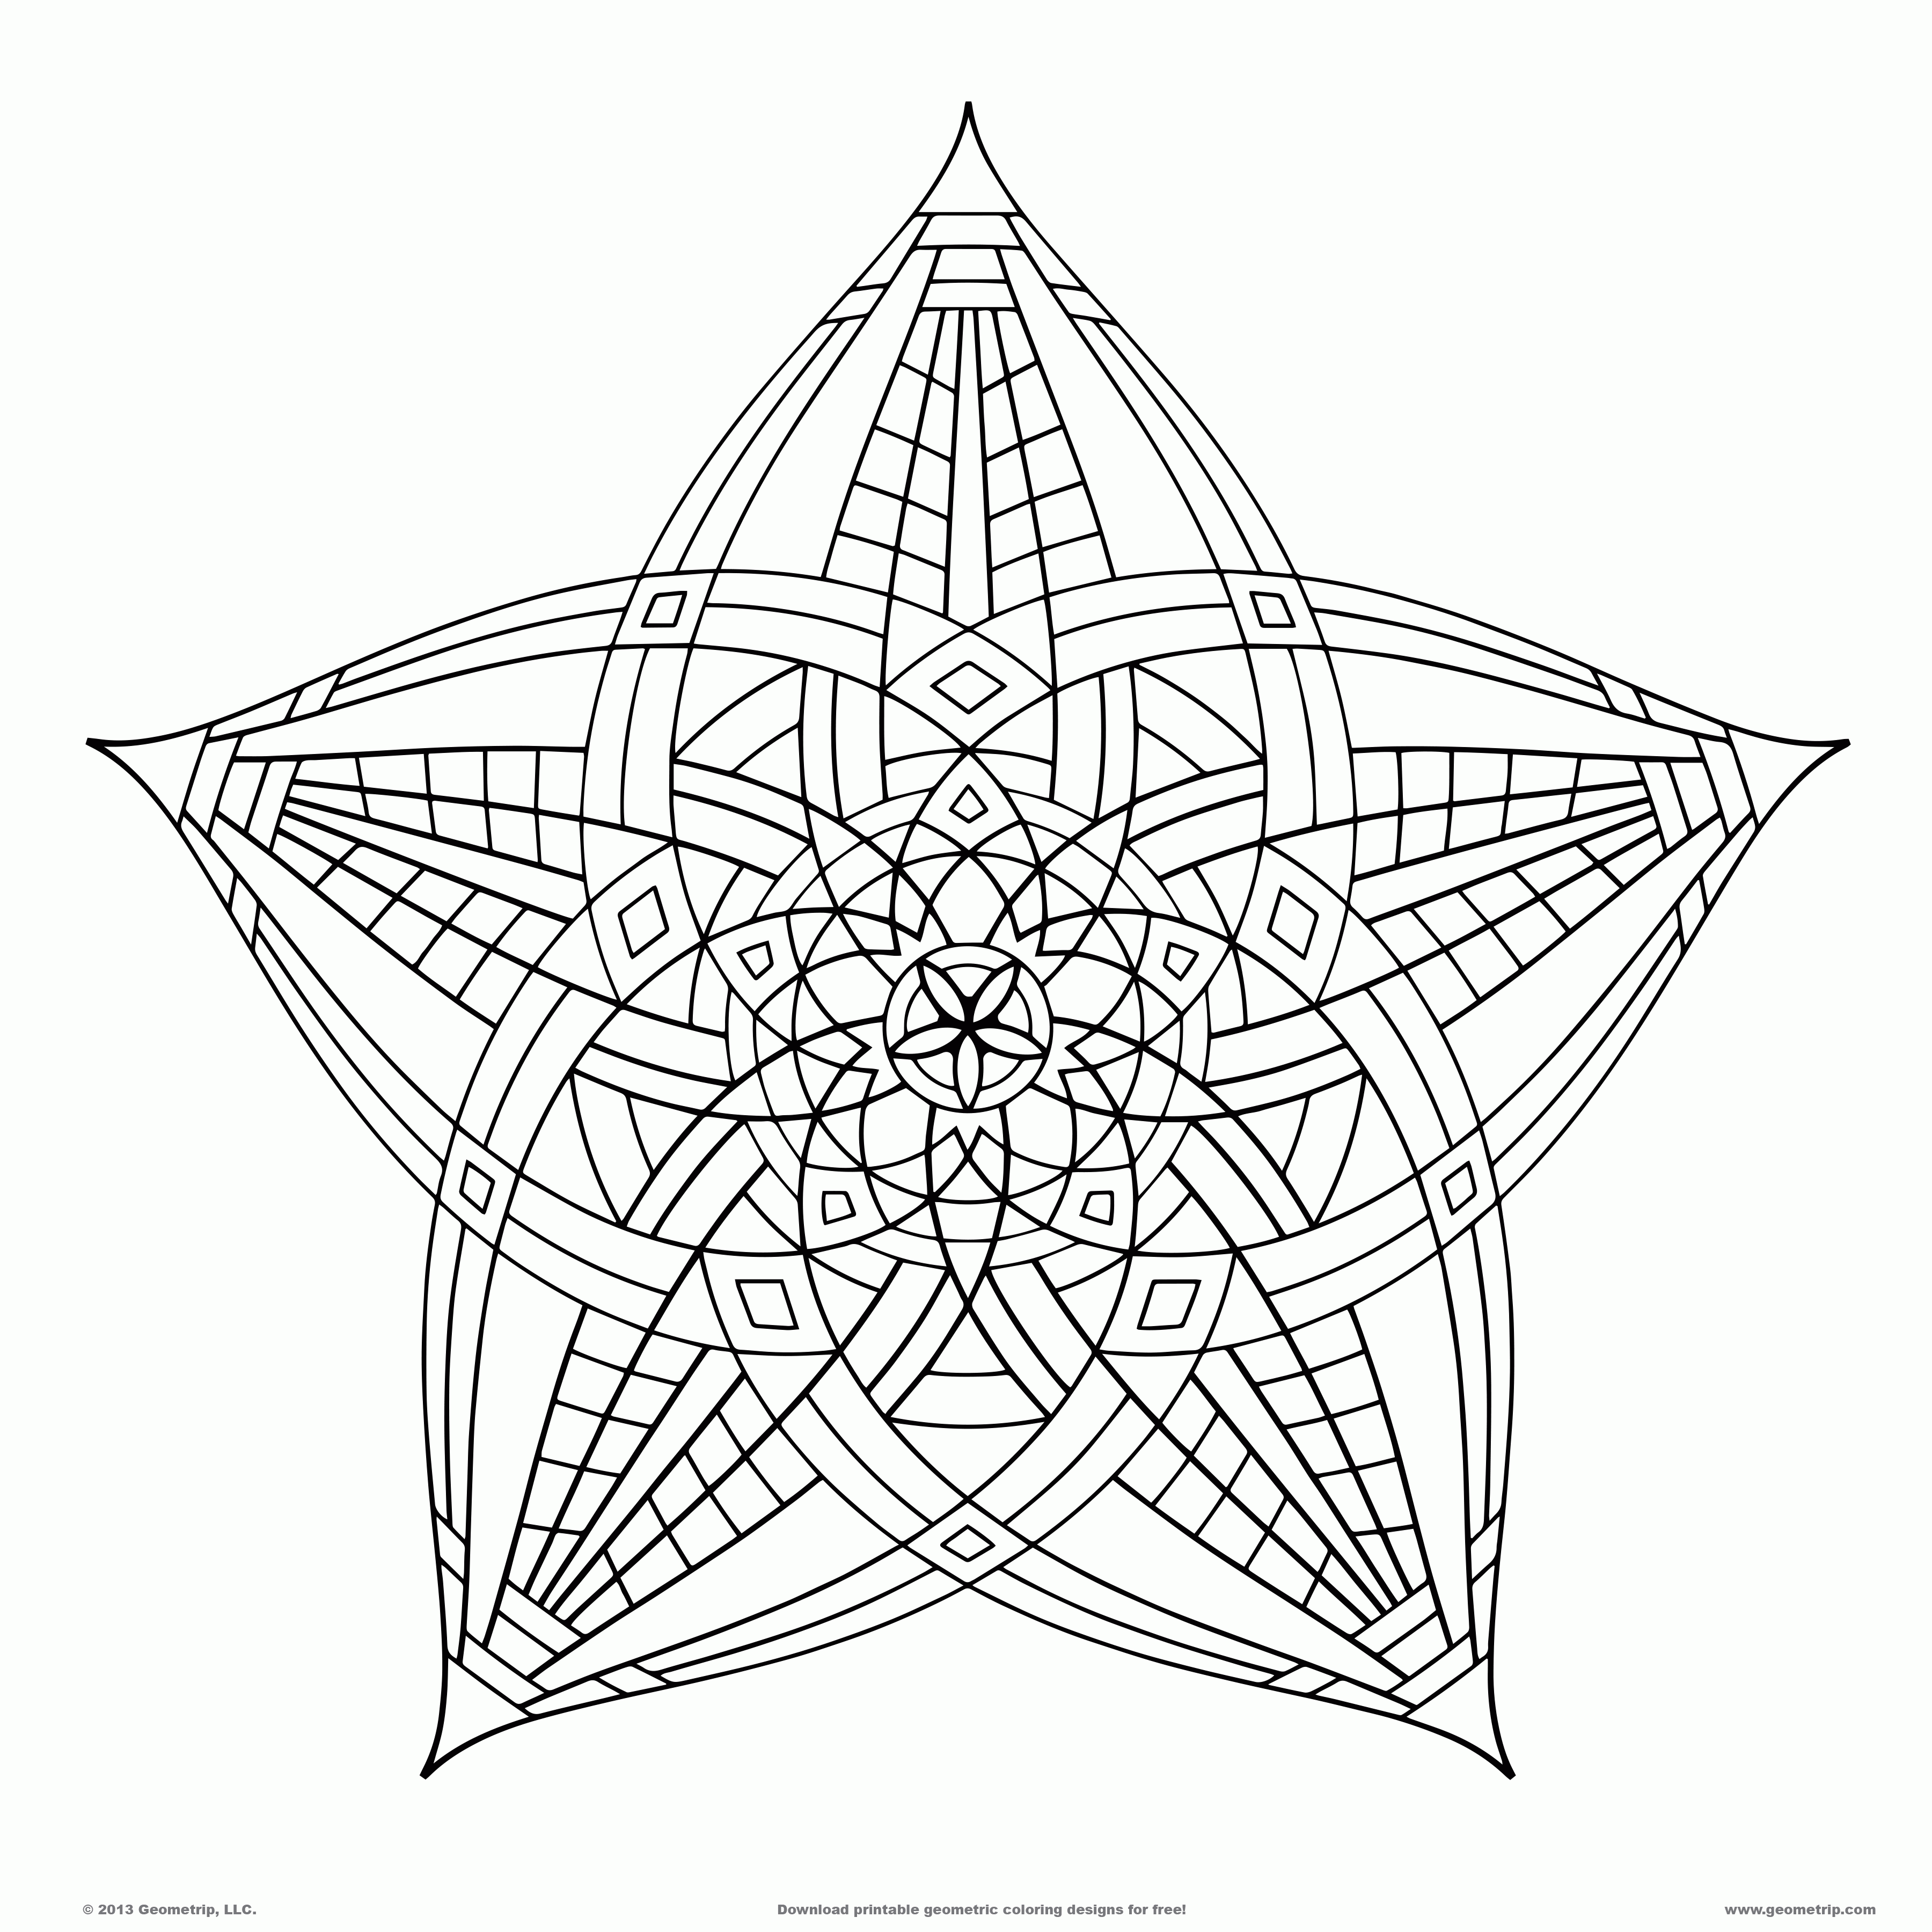 Geometric Design Coloring Pages For Adults Coloring Page For Kids ...